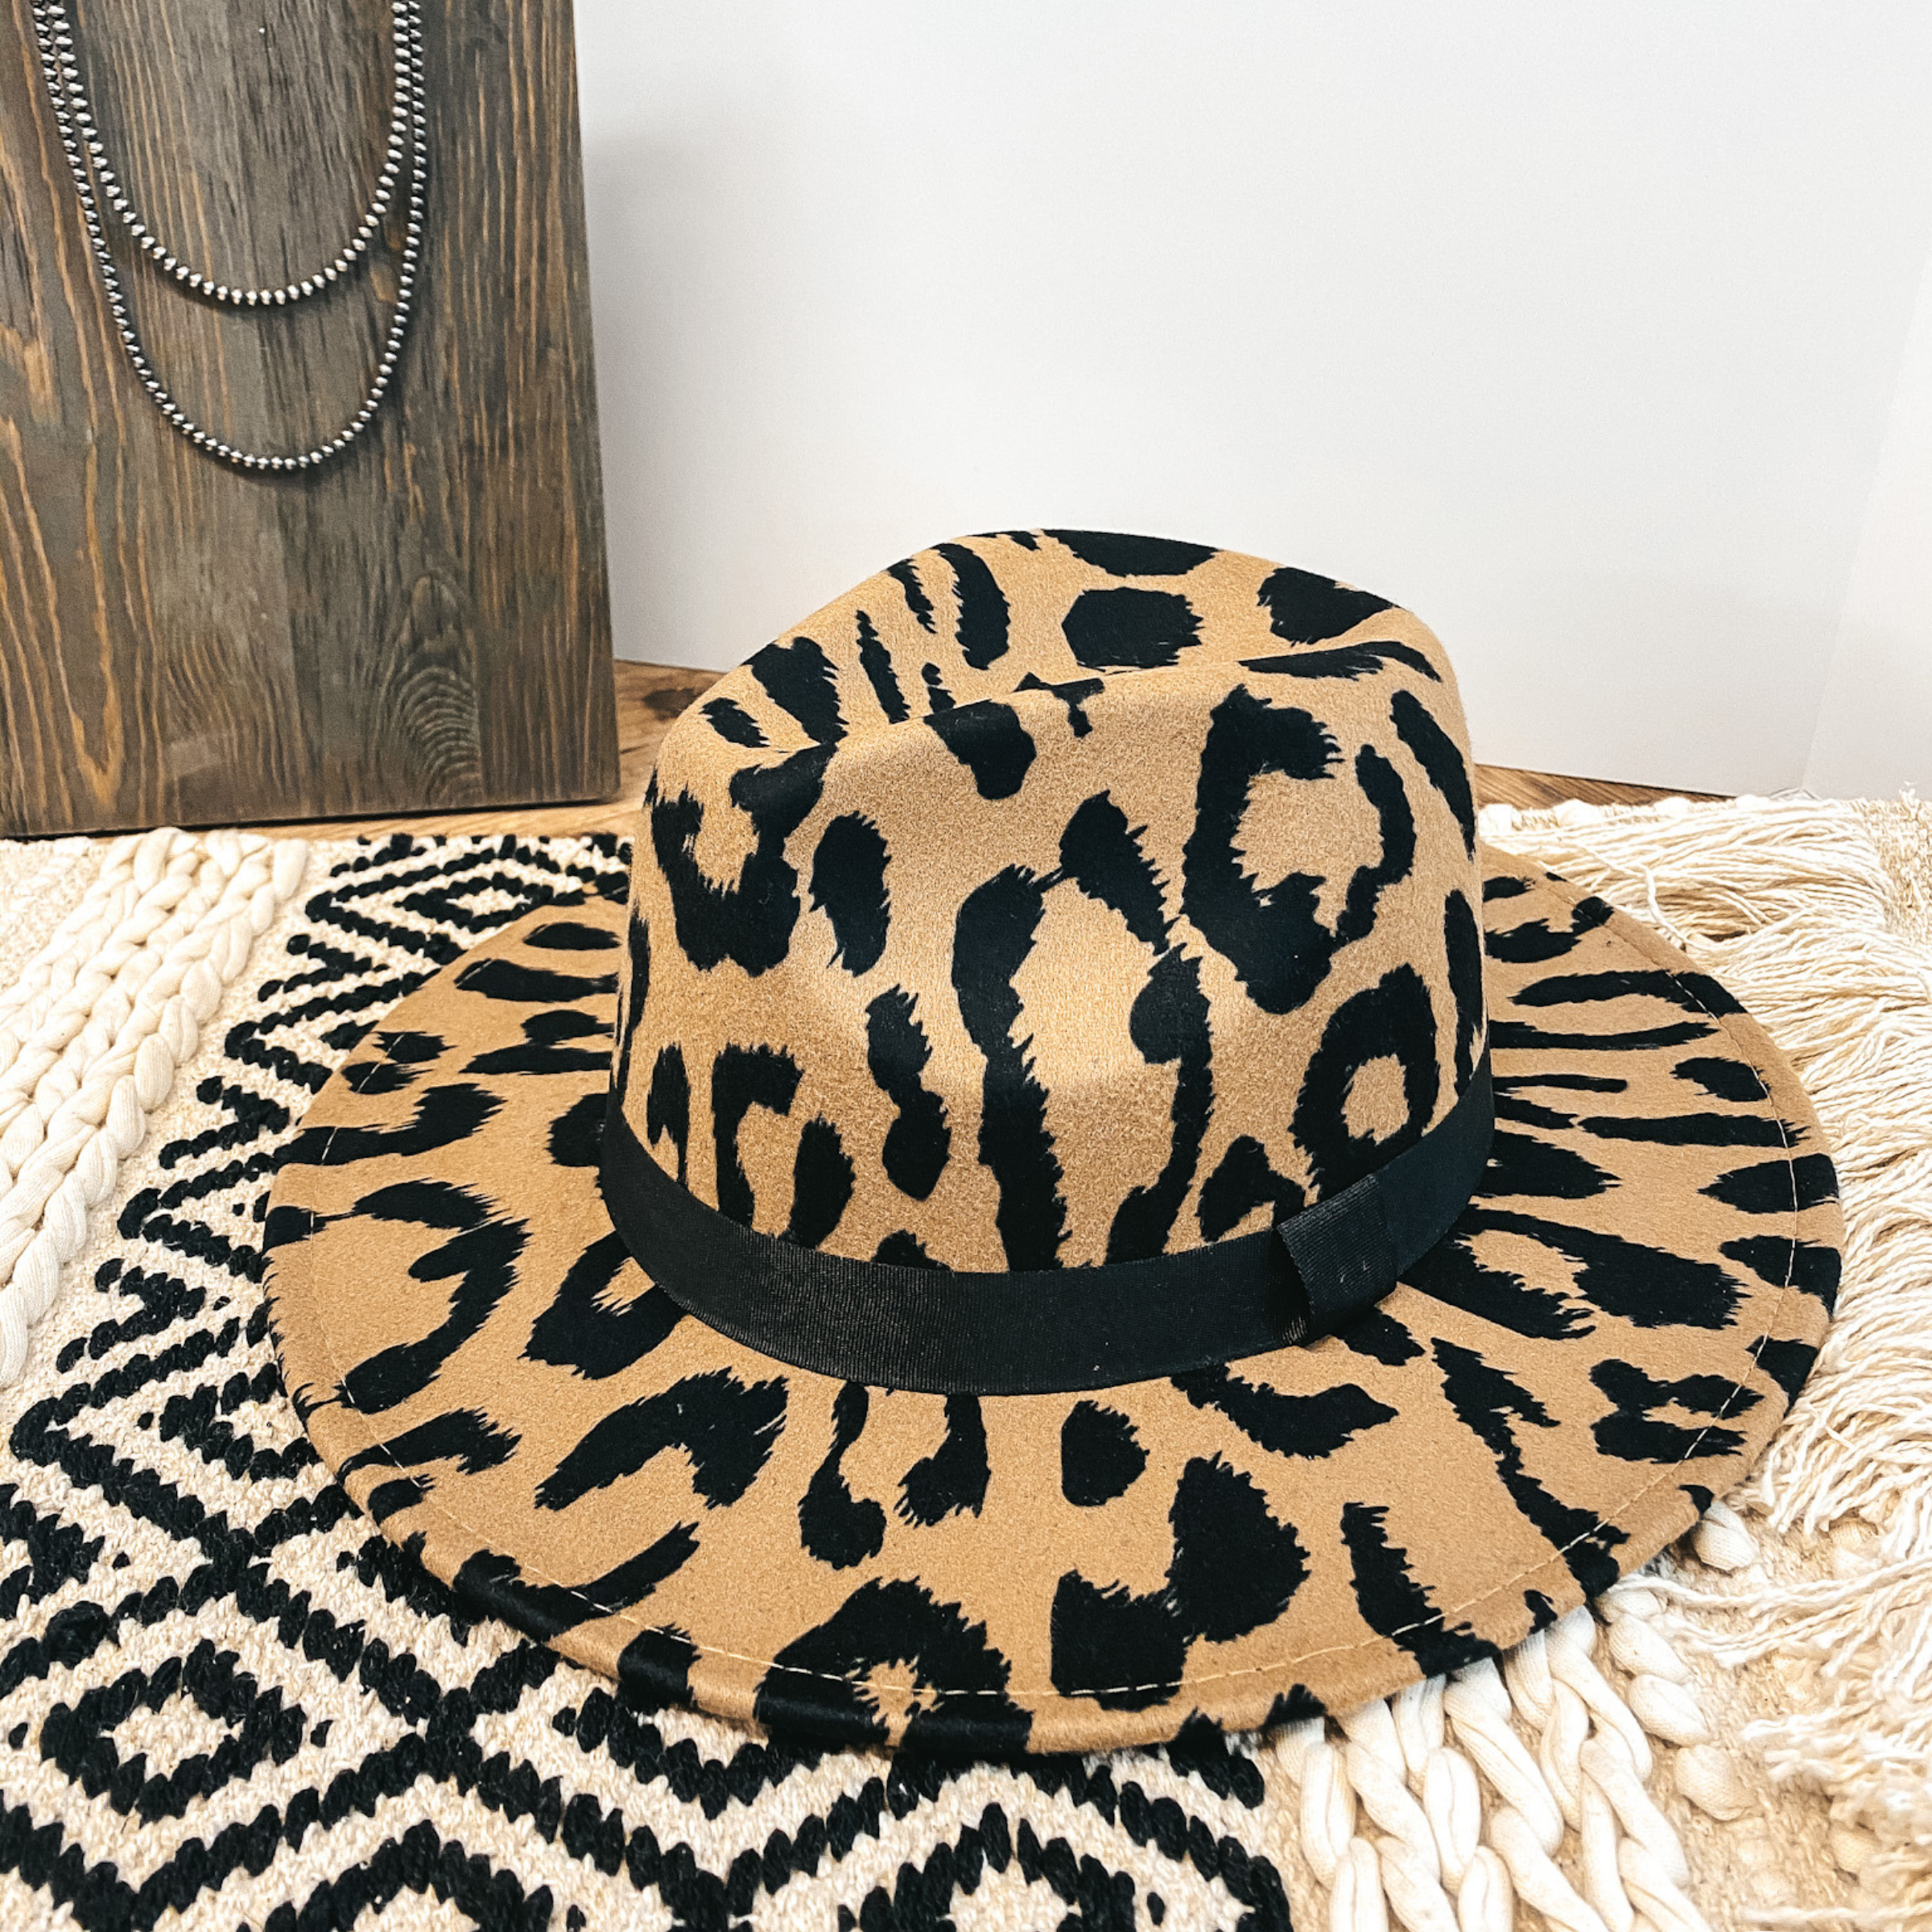 Wild Adventure Flat Brim Large Leopard Hat in Tan - Giddy Up Glamour Boutique